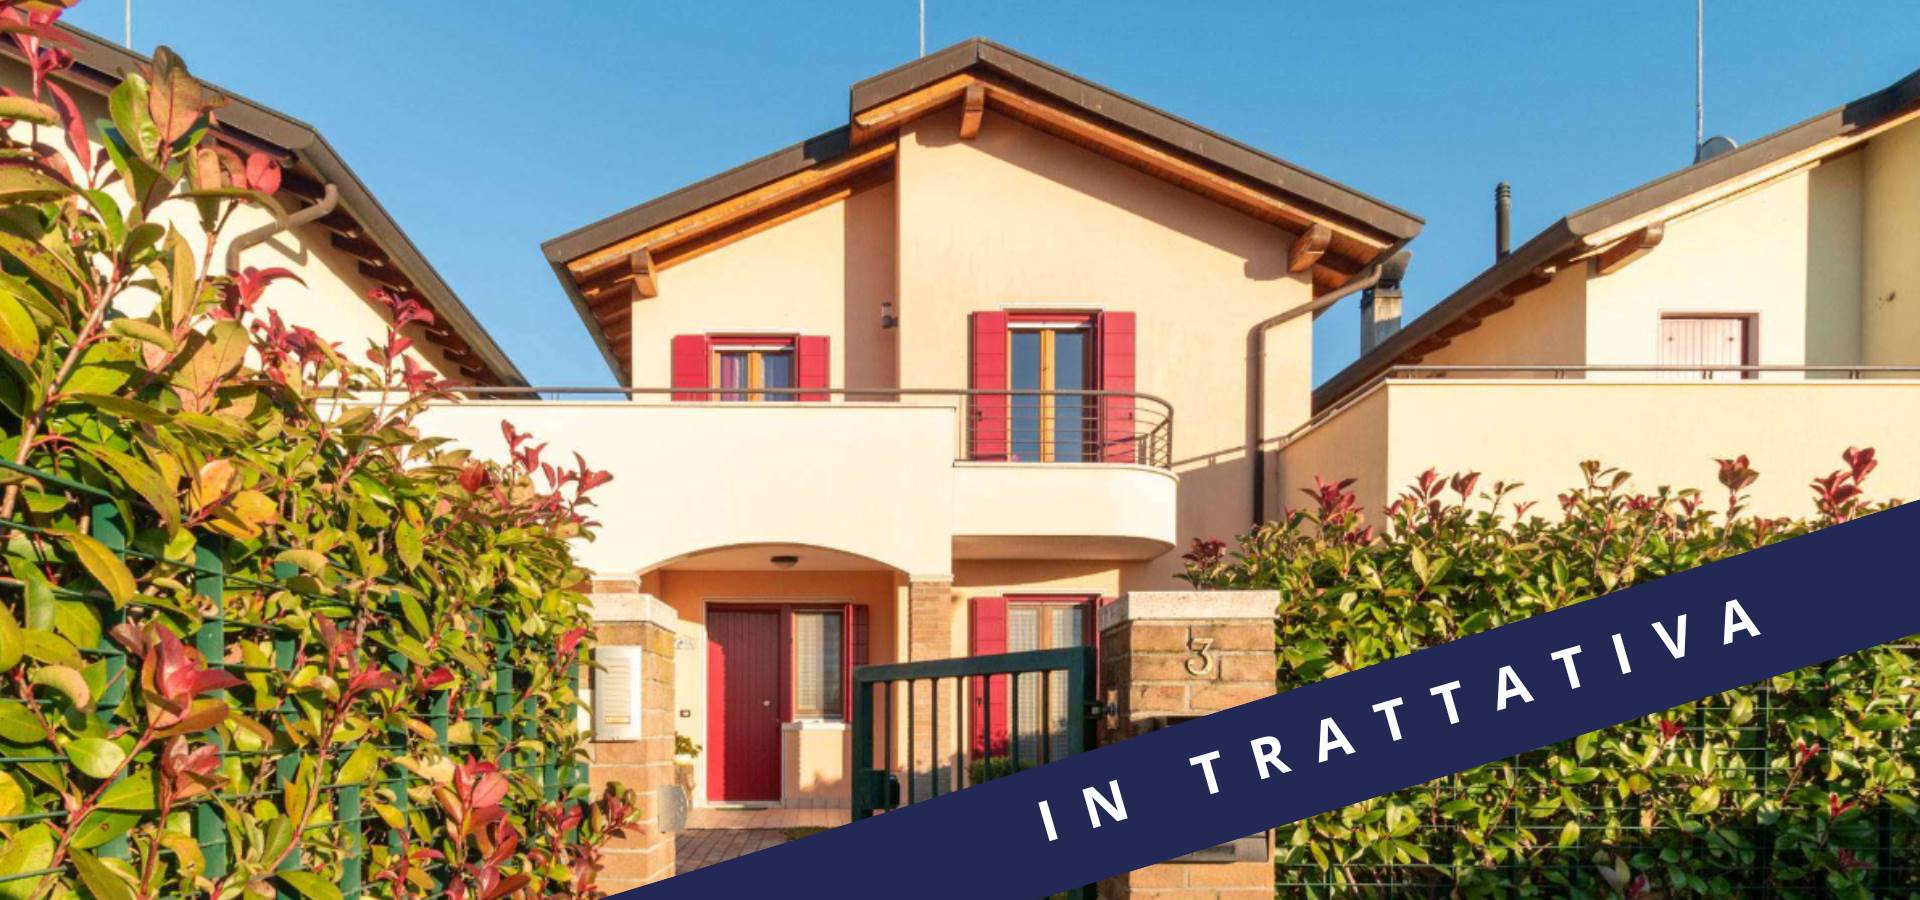 SAN MICHELE AL TAGLIAMENTO, Terraced villa for sale of 82 Sq. mt., Excellent Condition, Heating Individual heating system, Energetic class: B, composed by: 7 Rooms, Show cooking, , 2 Bedrooms, 2 